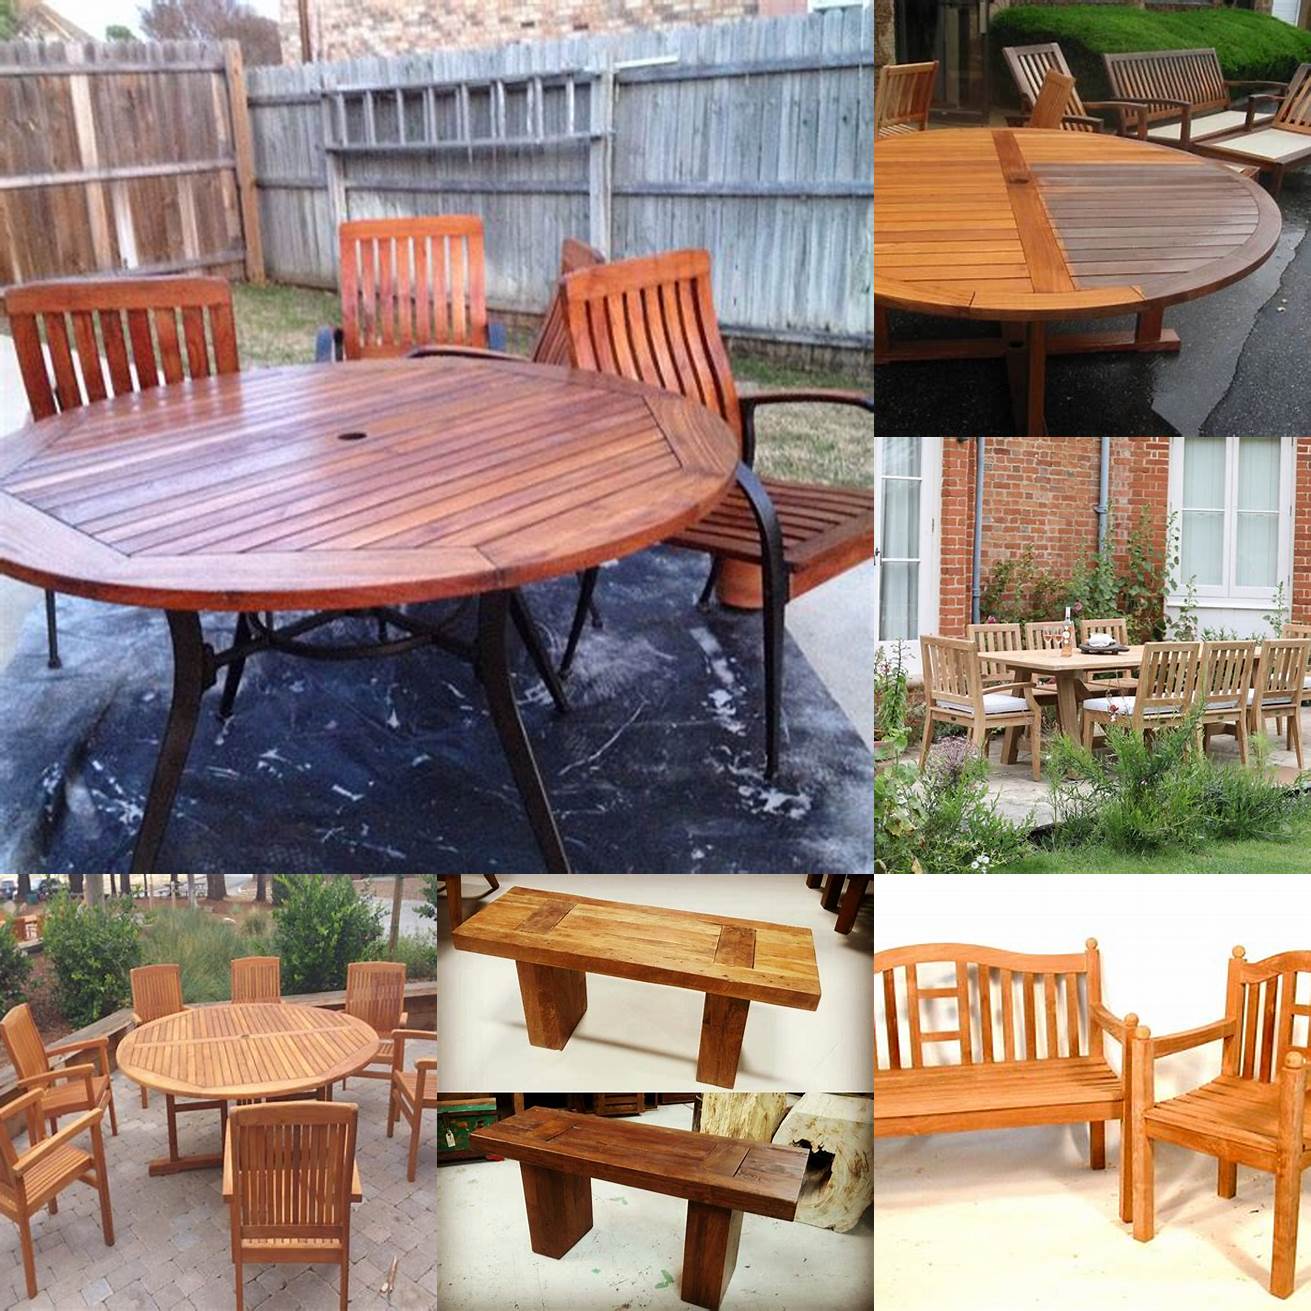 Comparison of Natural and Stained Provence Teak Furniture